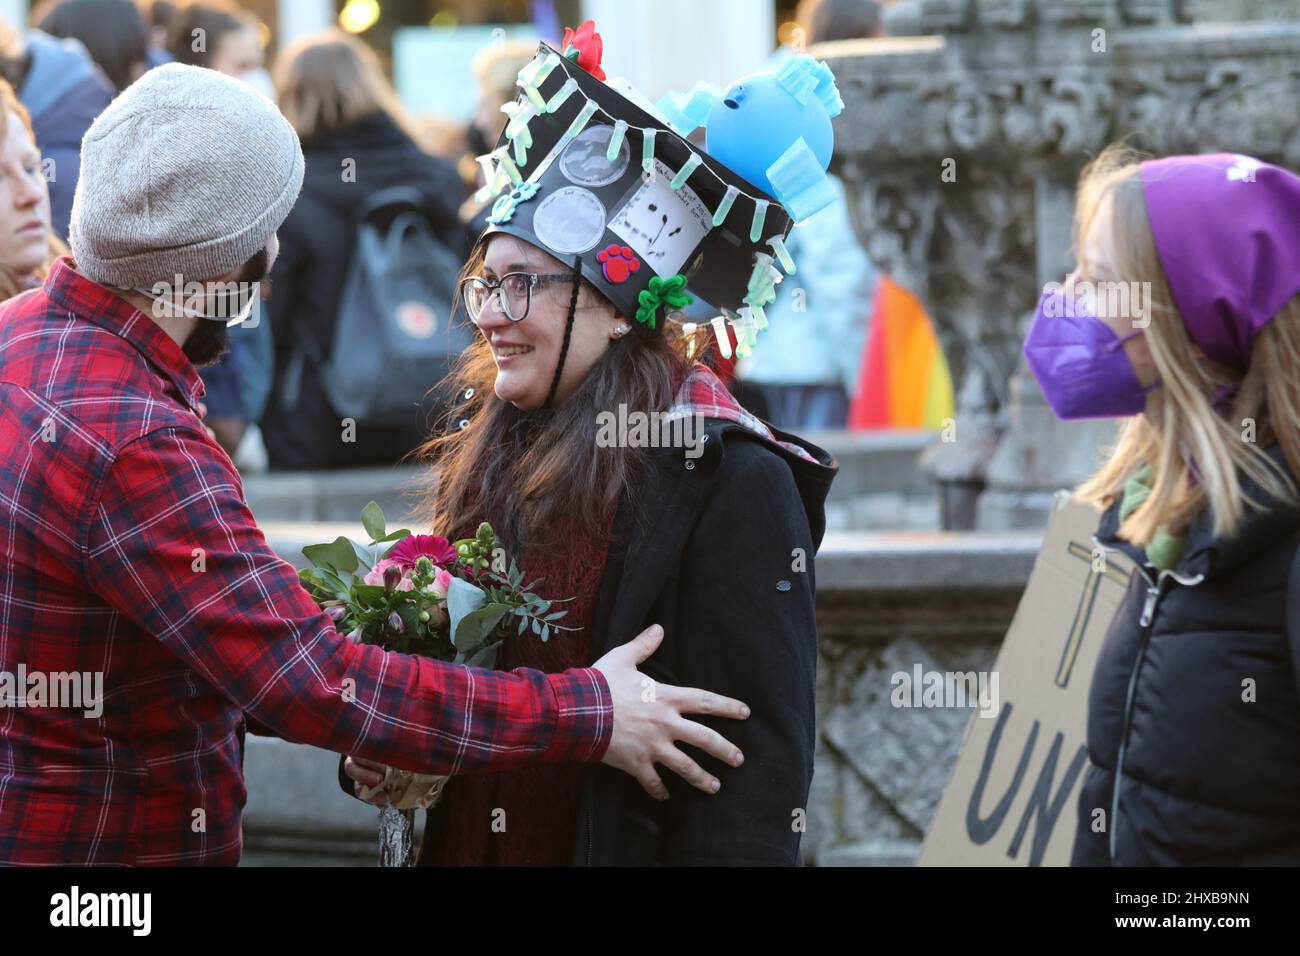 PhD graduate woman celebrate on Gänseliesel statue on the occasion of International Women's Day in Göttingen, Germany. By tradition PhD graduates climb Gaenseliesel fountain in centeral of Göttingen city, kiss the goose girl and give her flowers. Credit: Pacific Press Media Production Corp./Alamy Live News Stock Photo